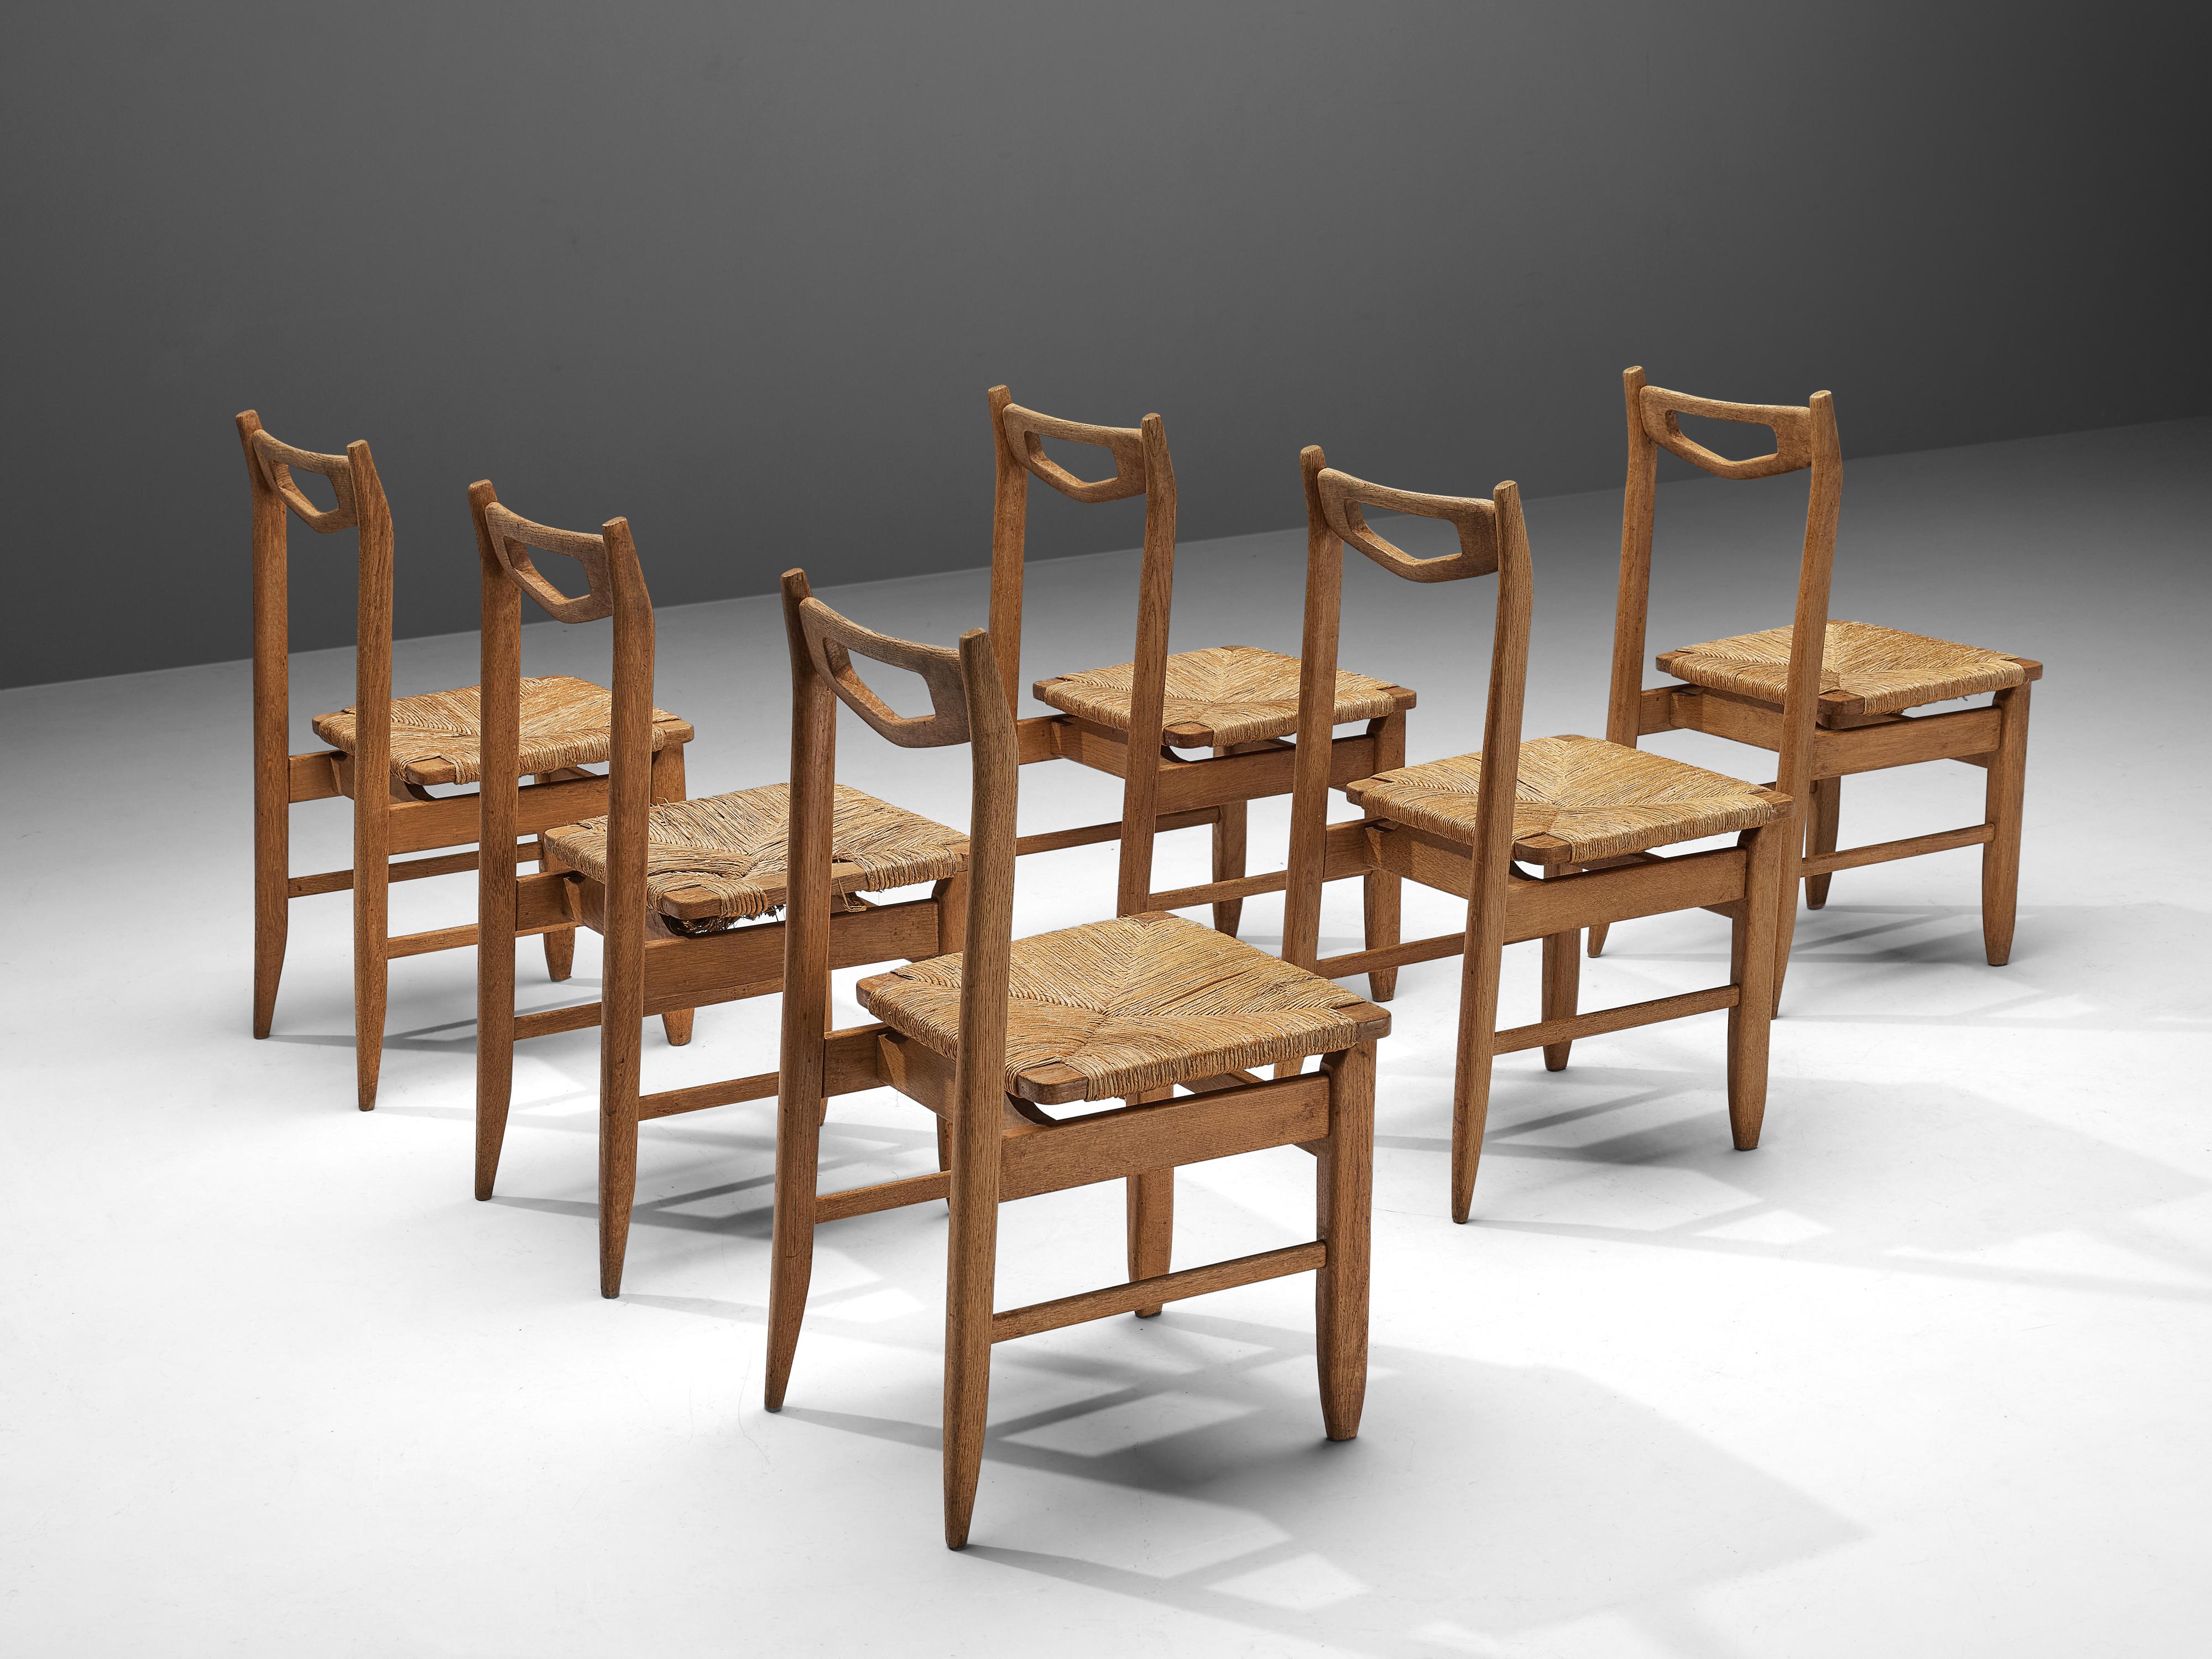 Guillerme & Chambron for Votre Maison, dining chairs, oak, rush, France, 1960s

Set of six elegant dining chairs in solid oak by Guillerme and Chambron. These chairs show the characteristic frame of this French designer duo. The backrest features